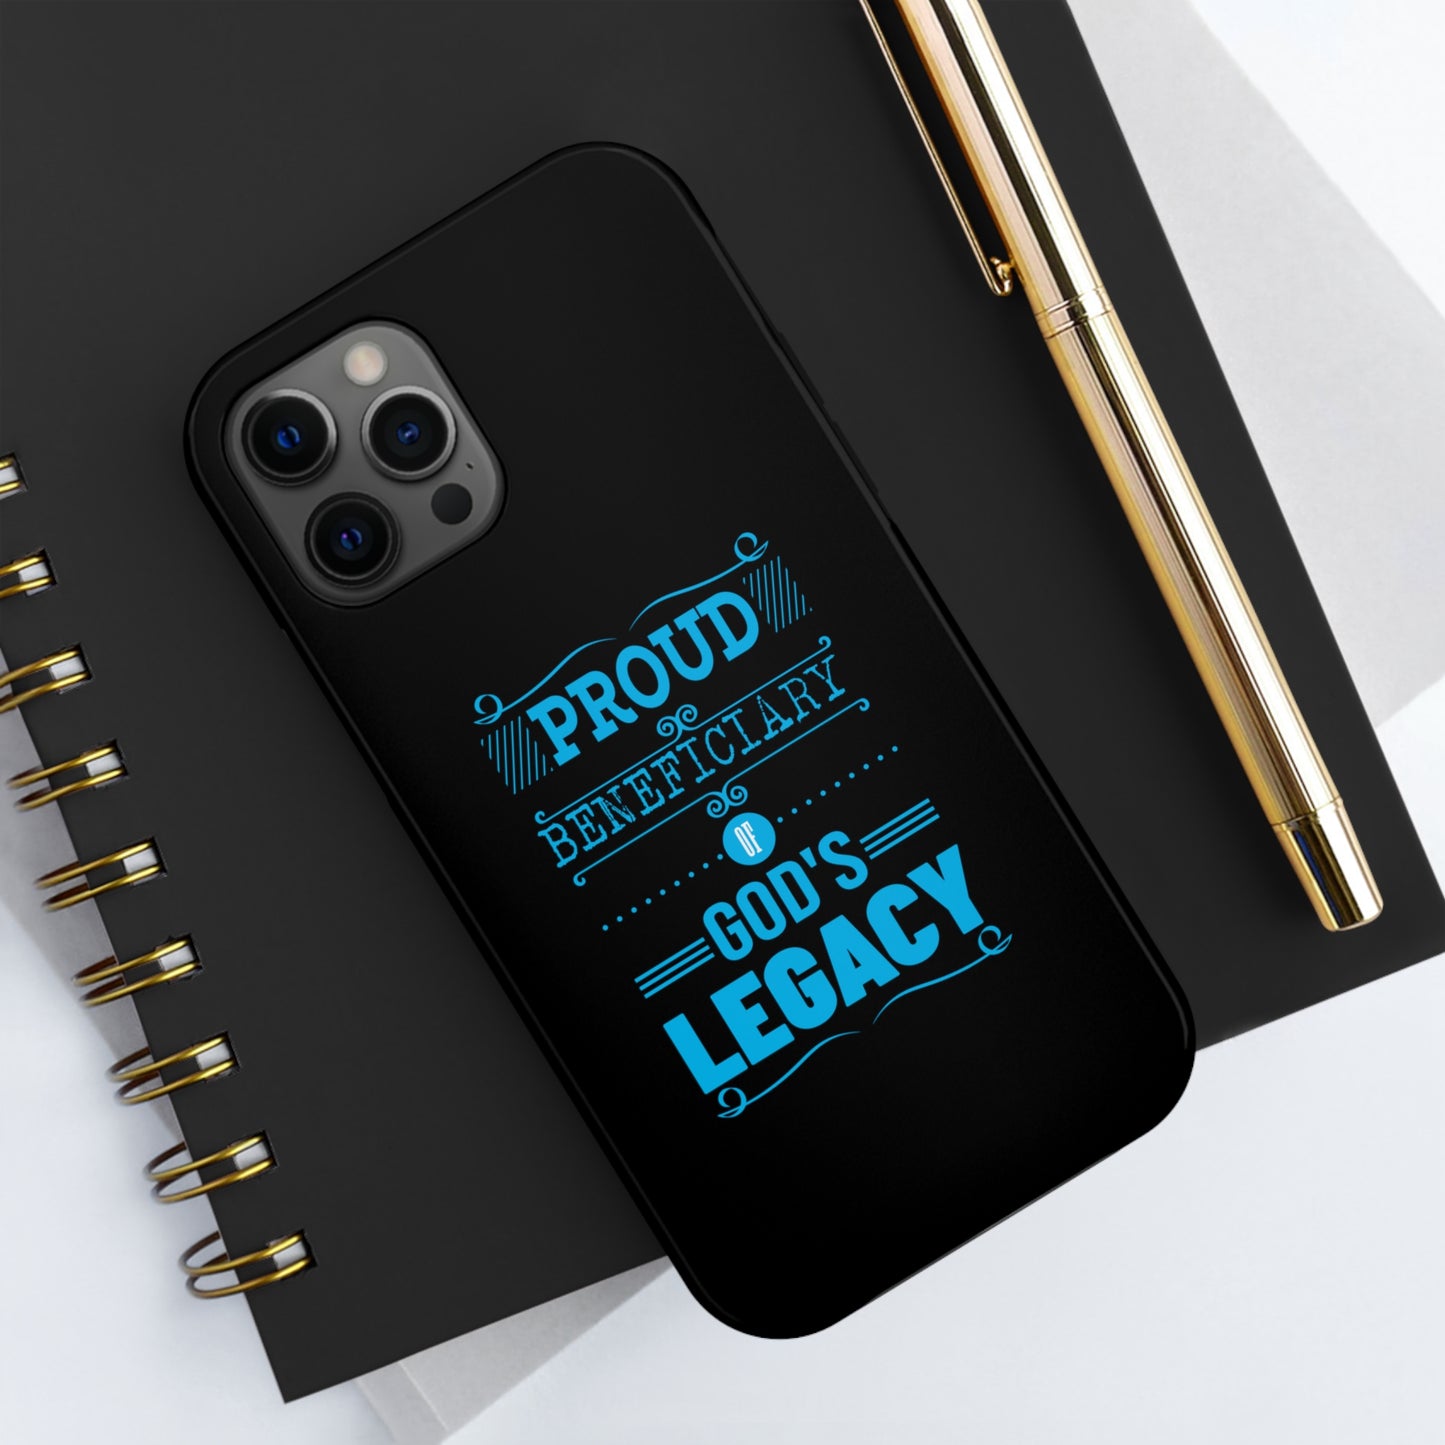 Proud Beneficiary Of God's Legacy Tough Phone Cases, Case-Mate